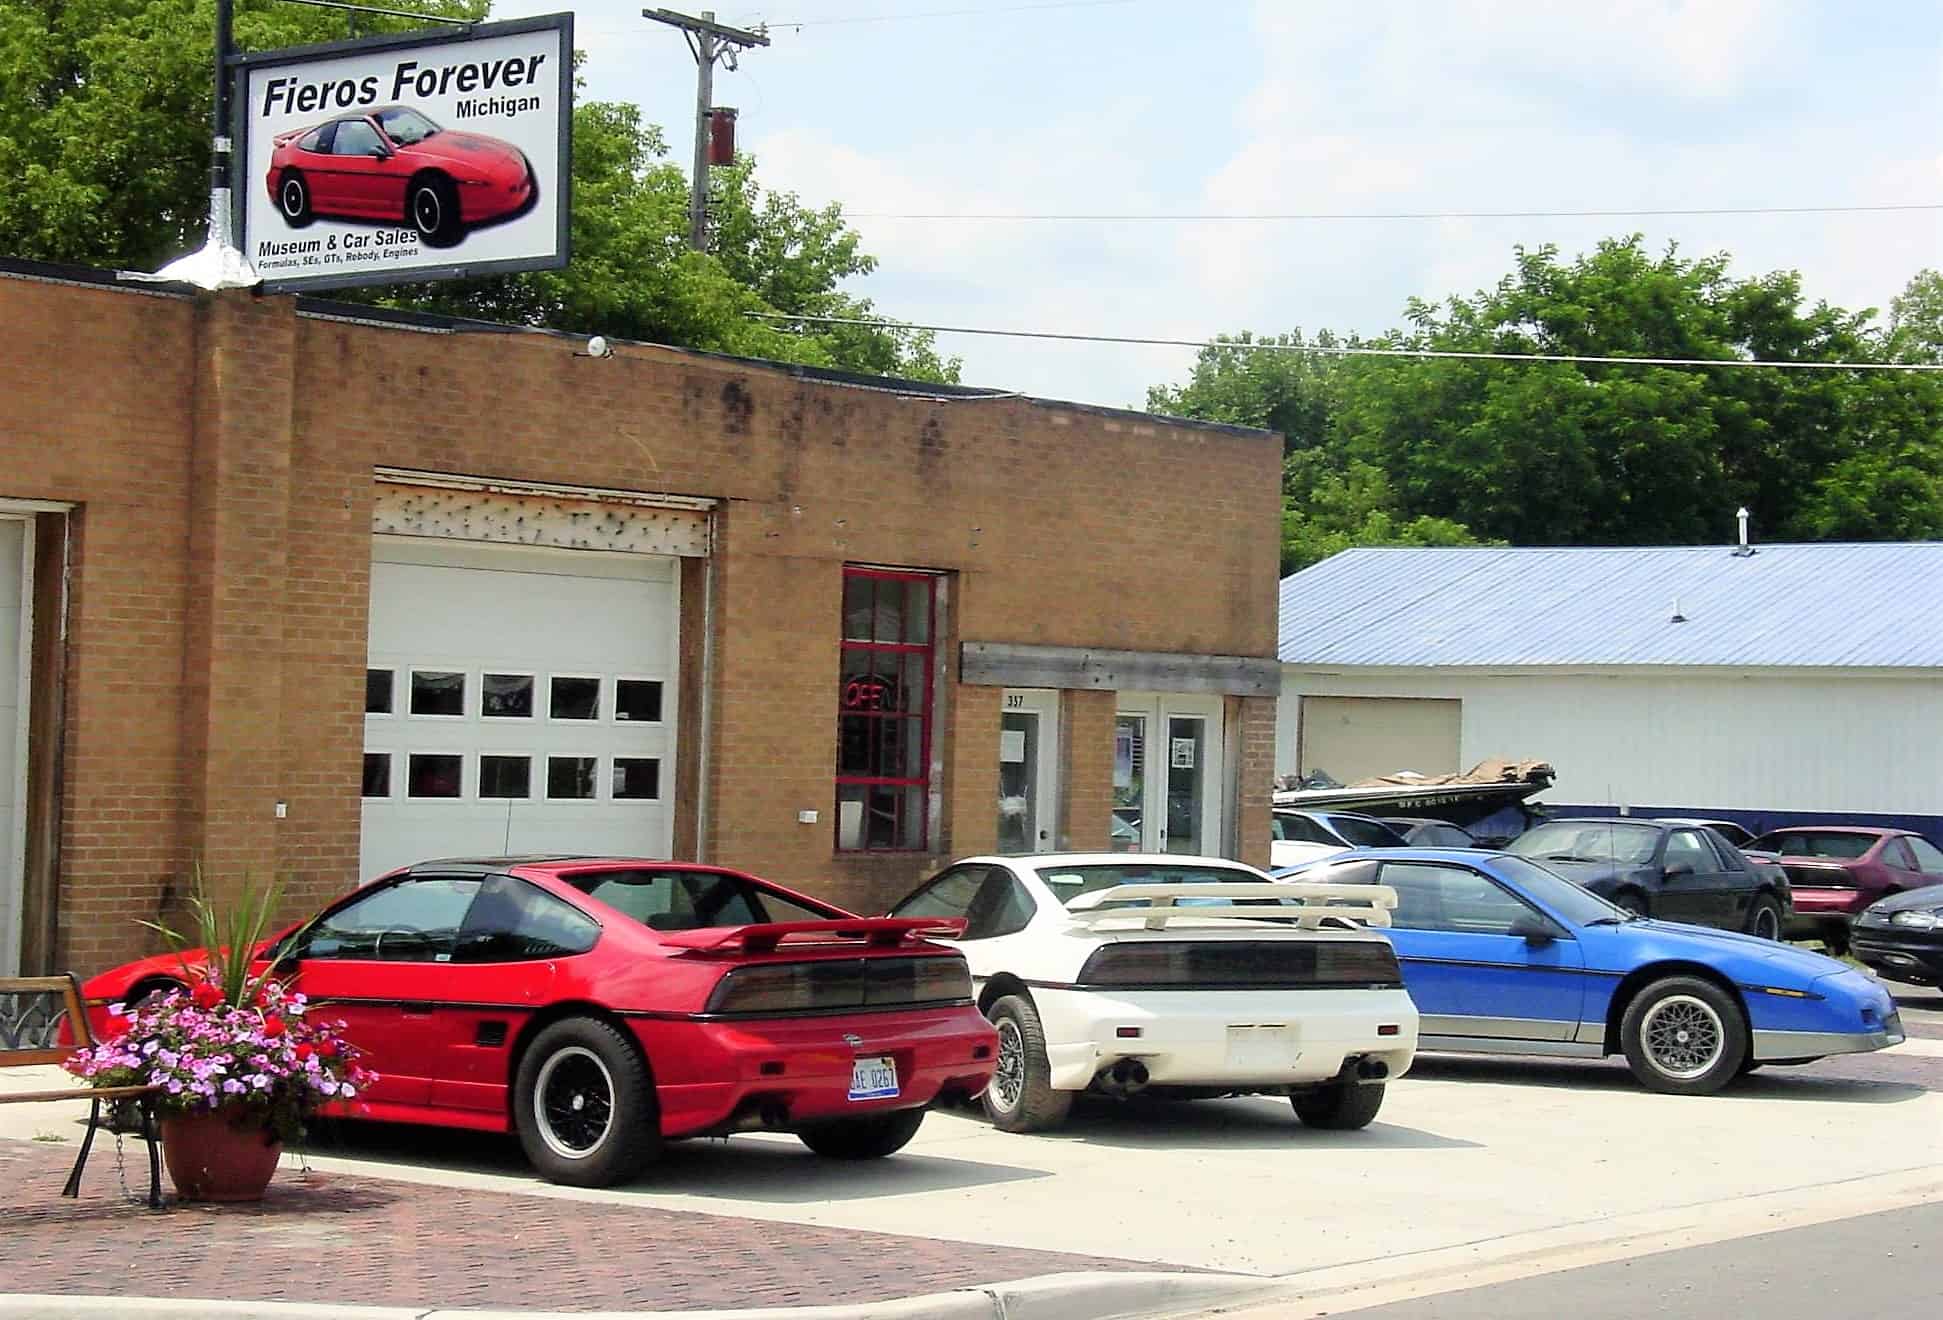 fiero, Pontiac Fiero museum destroyed in Michigan flooding was labor of love, ClassicCars.com Journal